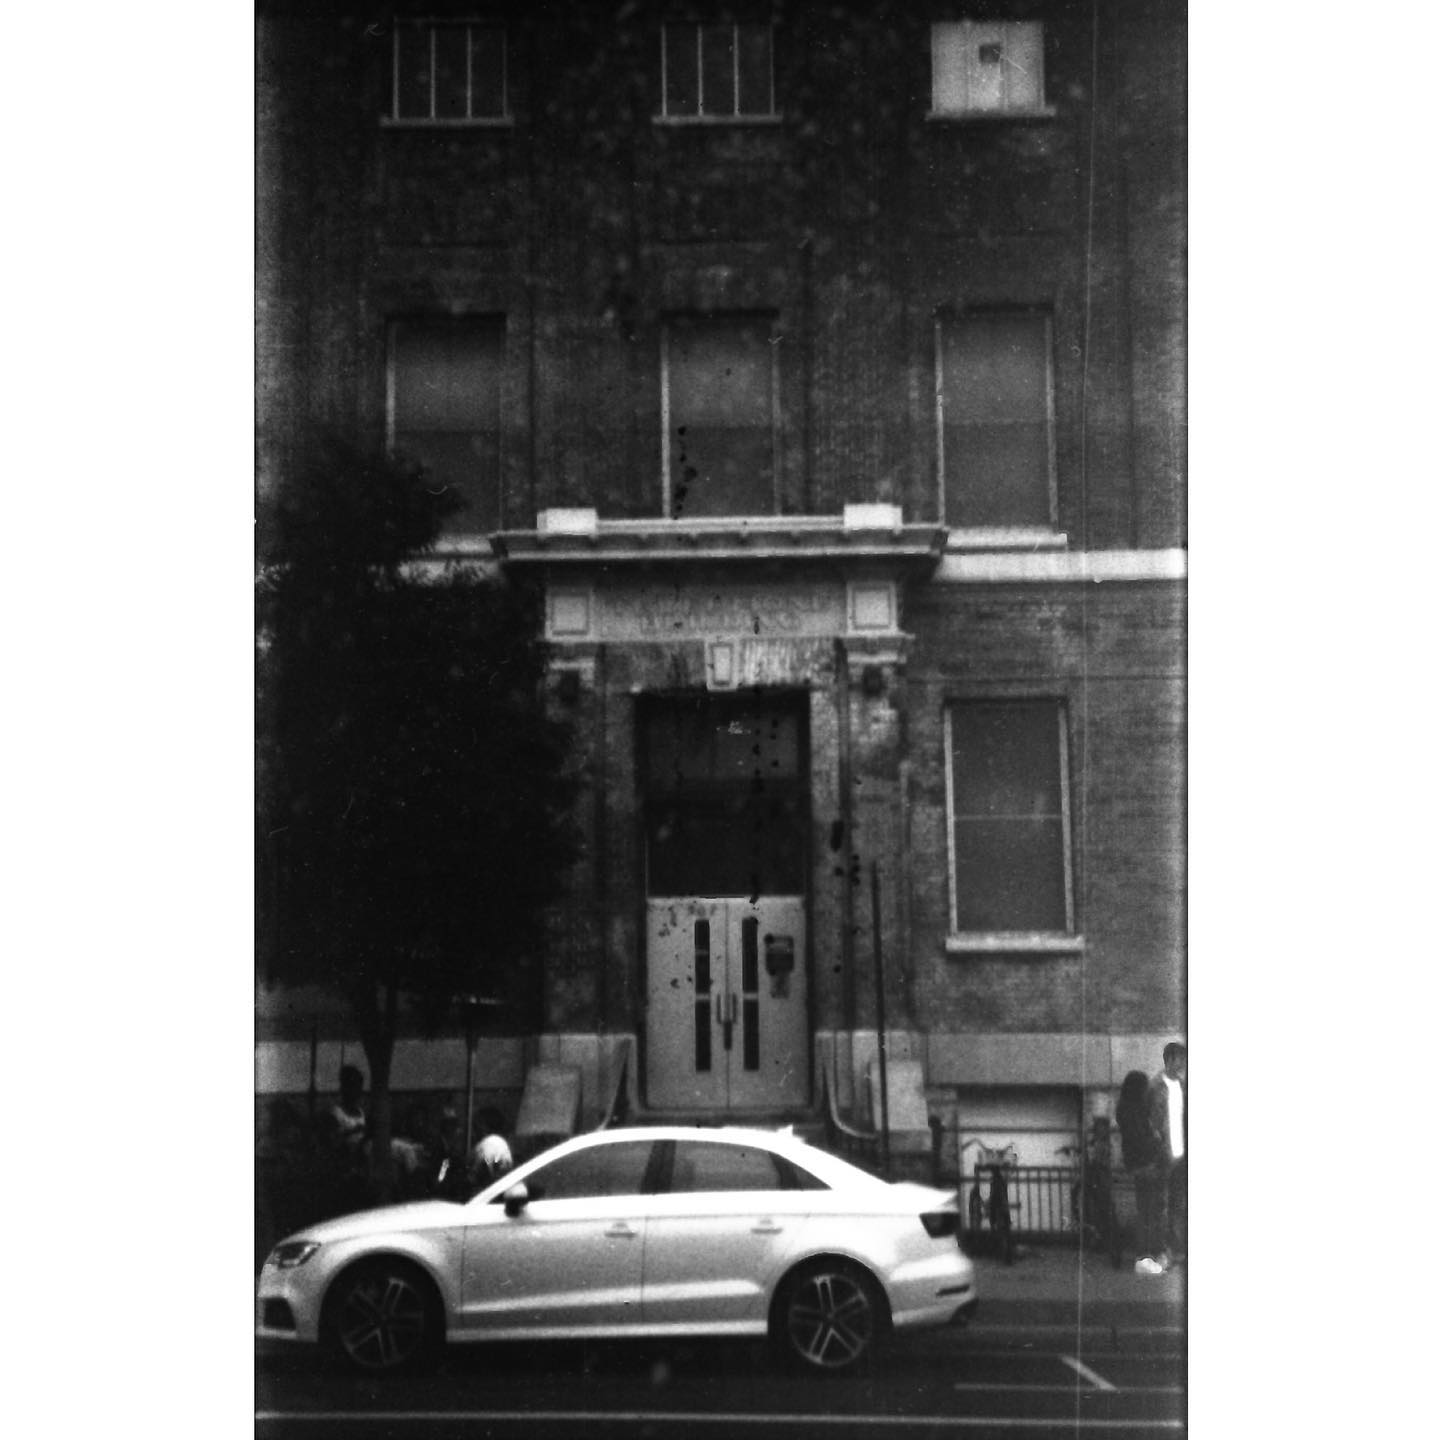 Telephone Building

507 Bangs in Asbury Park. Another shot from my #contaxiiia on 90+ year old Eastman No. 10 film that expired in 1931. #film #filmphotography #staybrokeshootfilm #allthroughalenspodcast